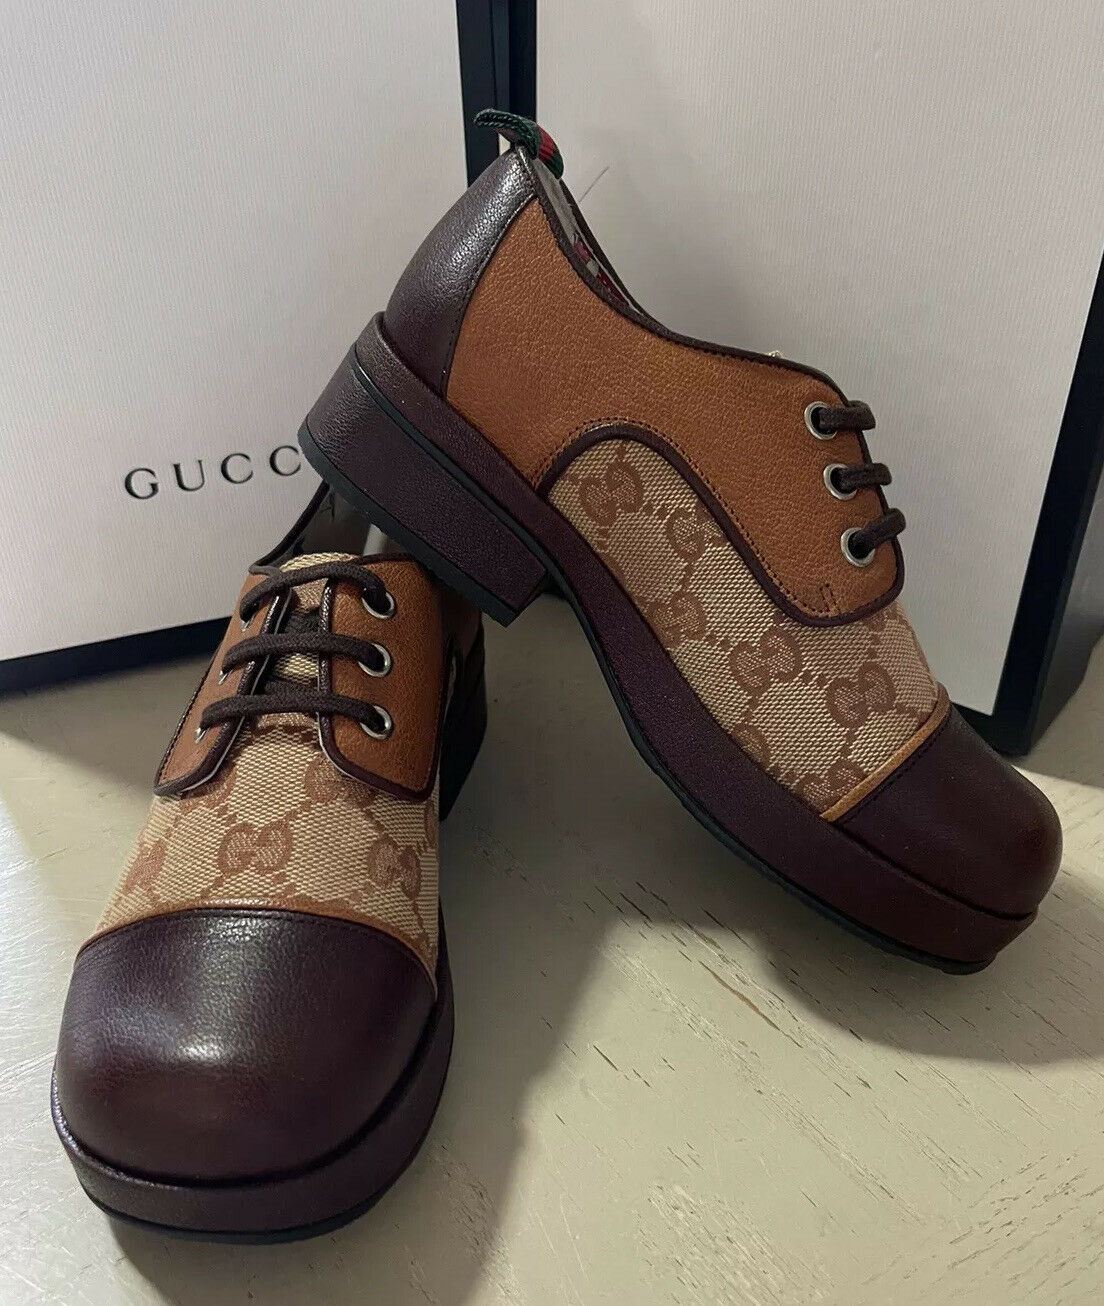 NIB $1100 Gucci Boys GG Monogram Leather/Canvas Shoes Brown Size 31/13 US Age 6